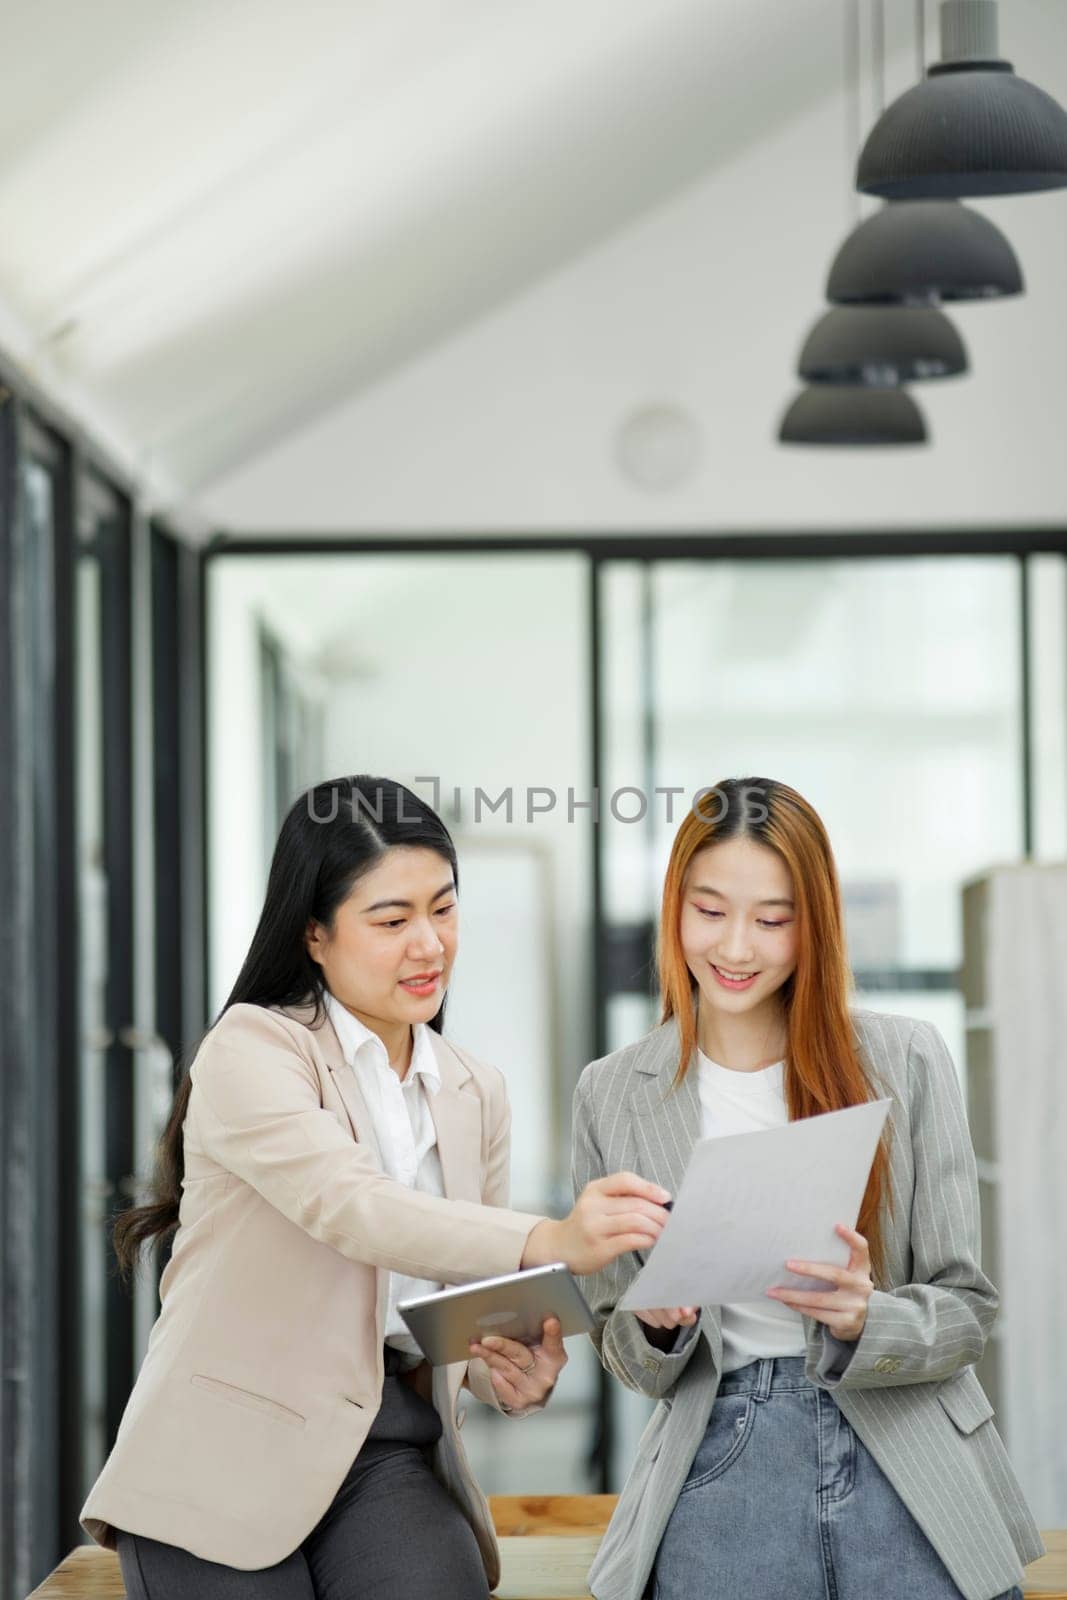 Two engaging businesswomen enjoying a casual conversation while holding coffee, illustrating a relaxed corporate culture.